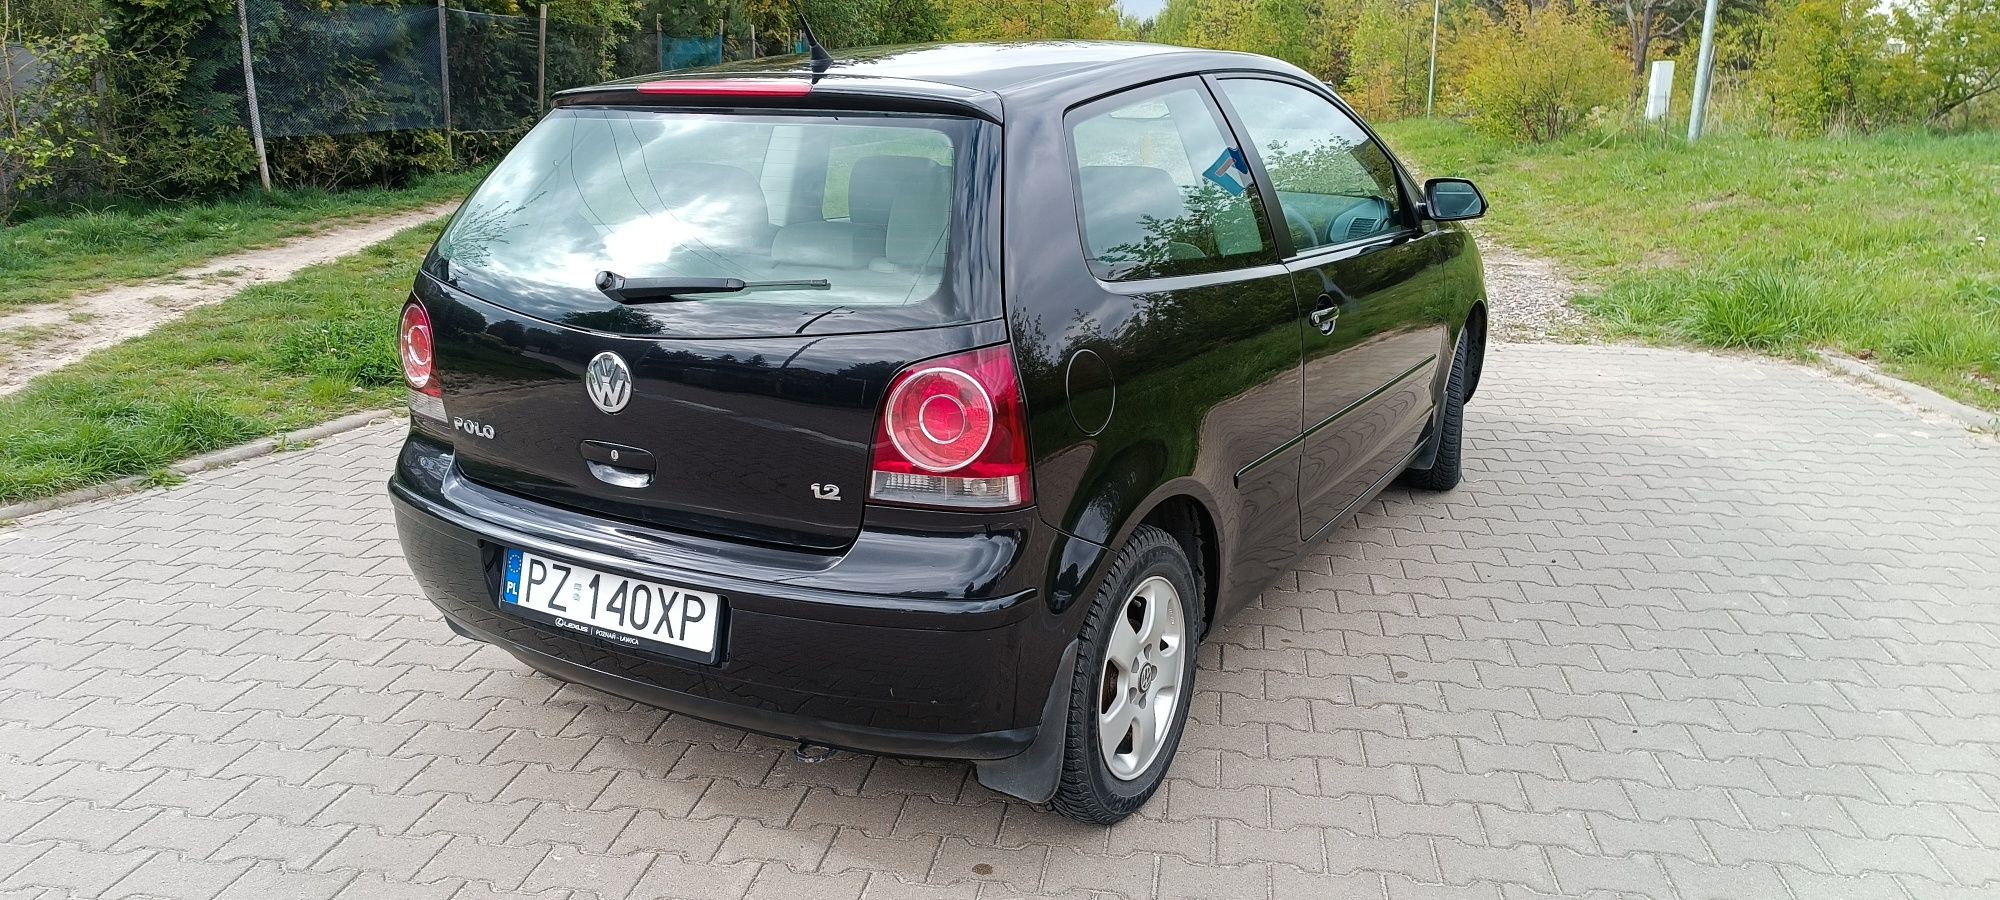 Volkswagen Polo 2008r.  1.2 benzyna